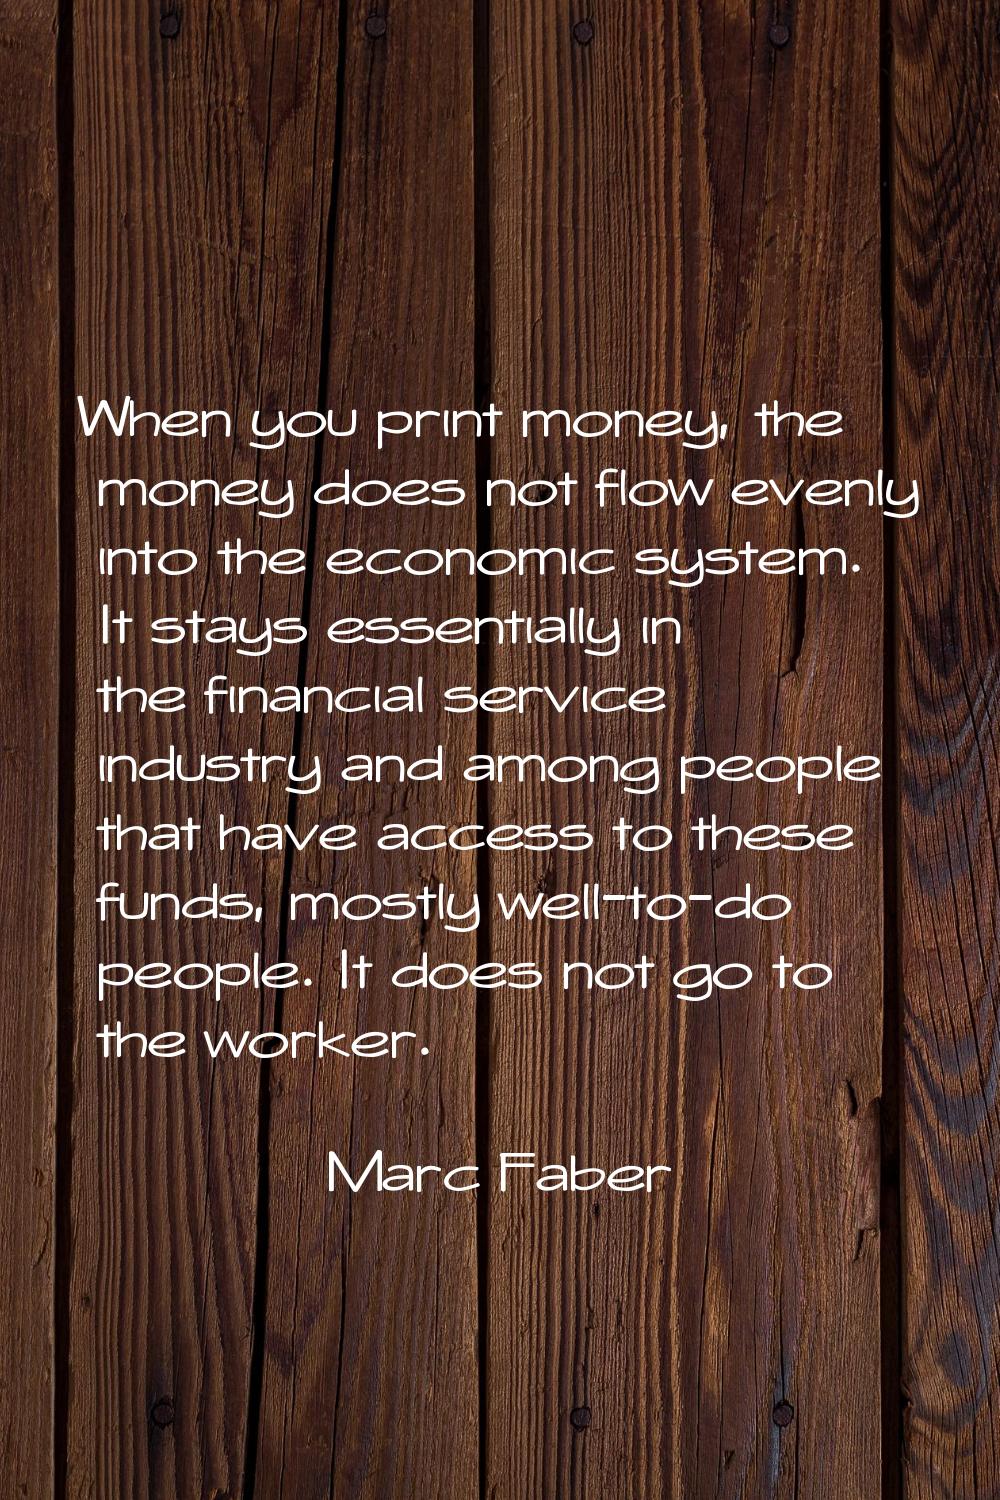 When you print money, the money does not flow evenly into the economic system. It stays essentially